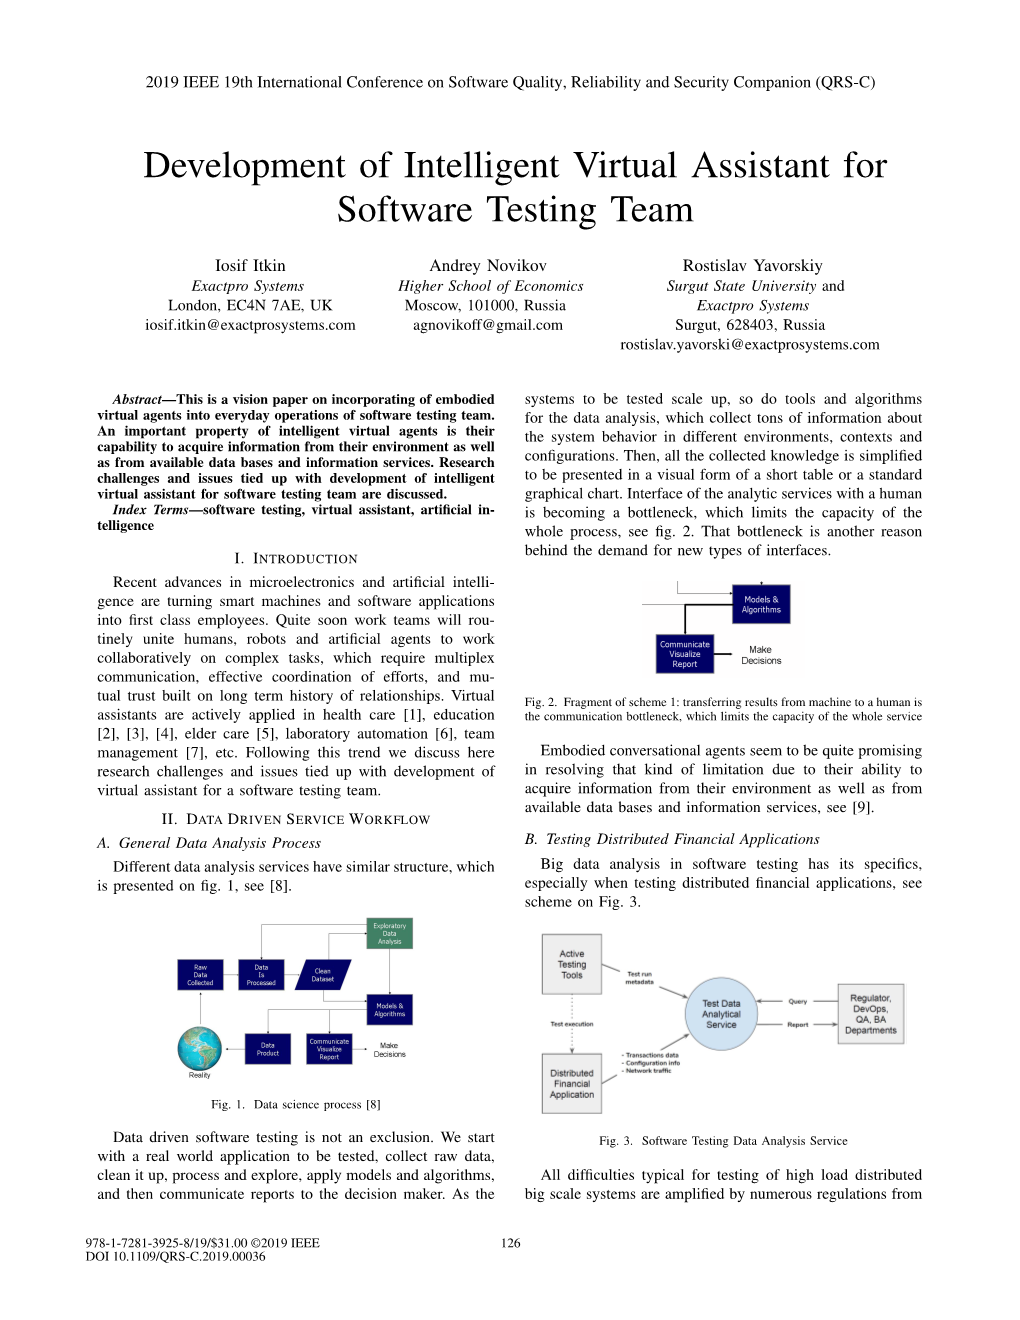 Development of Intelligent Virtual Assistant for Software Testing Team